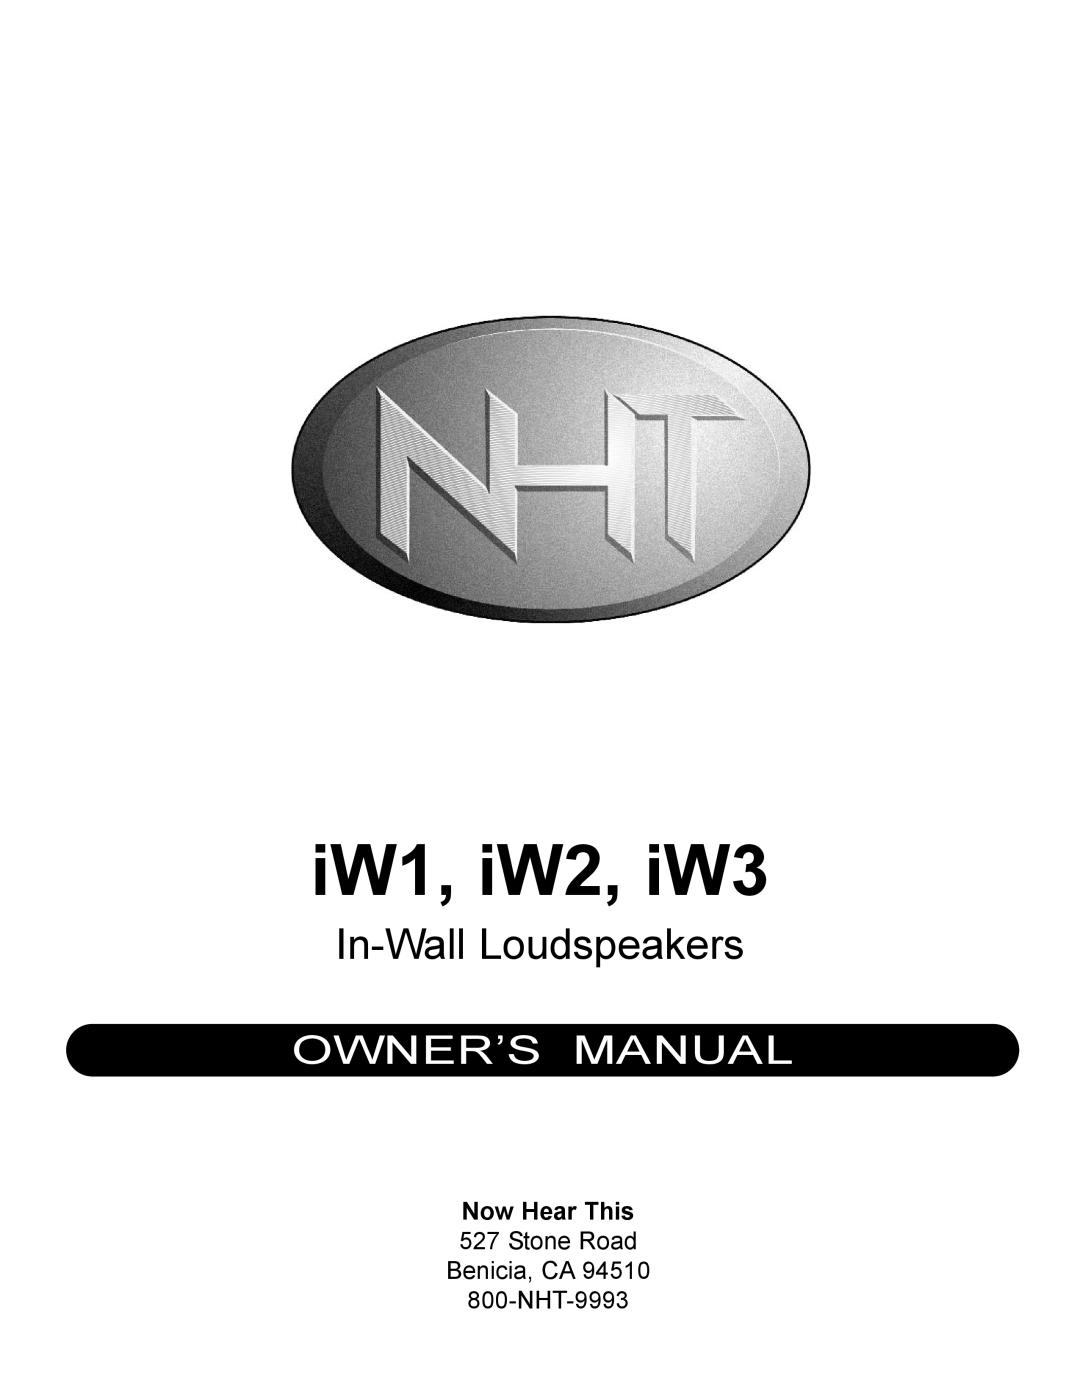 NHT IW2 owner manual Now Hear This, iW1, iW2, iW3, In-WallLoudspeakers, Stone Road Benicia, CA 800-NHT-9993 